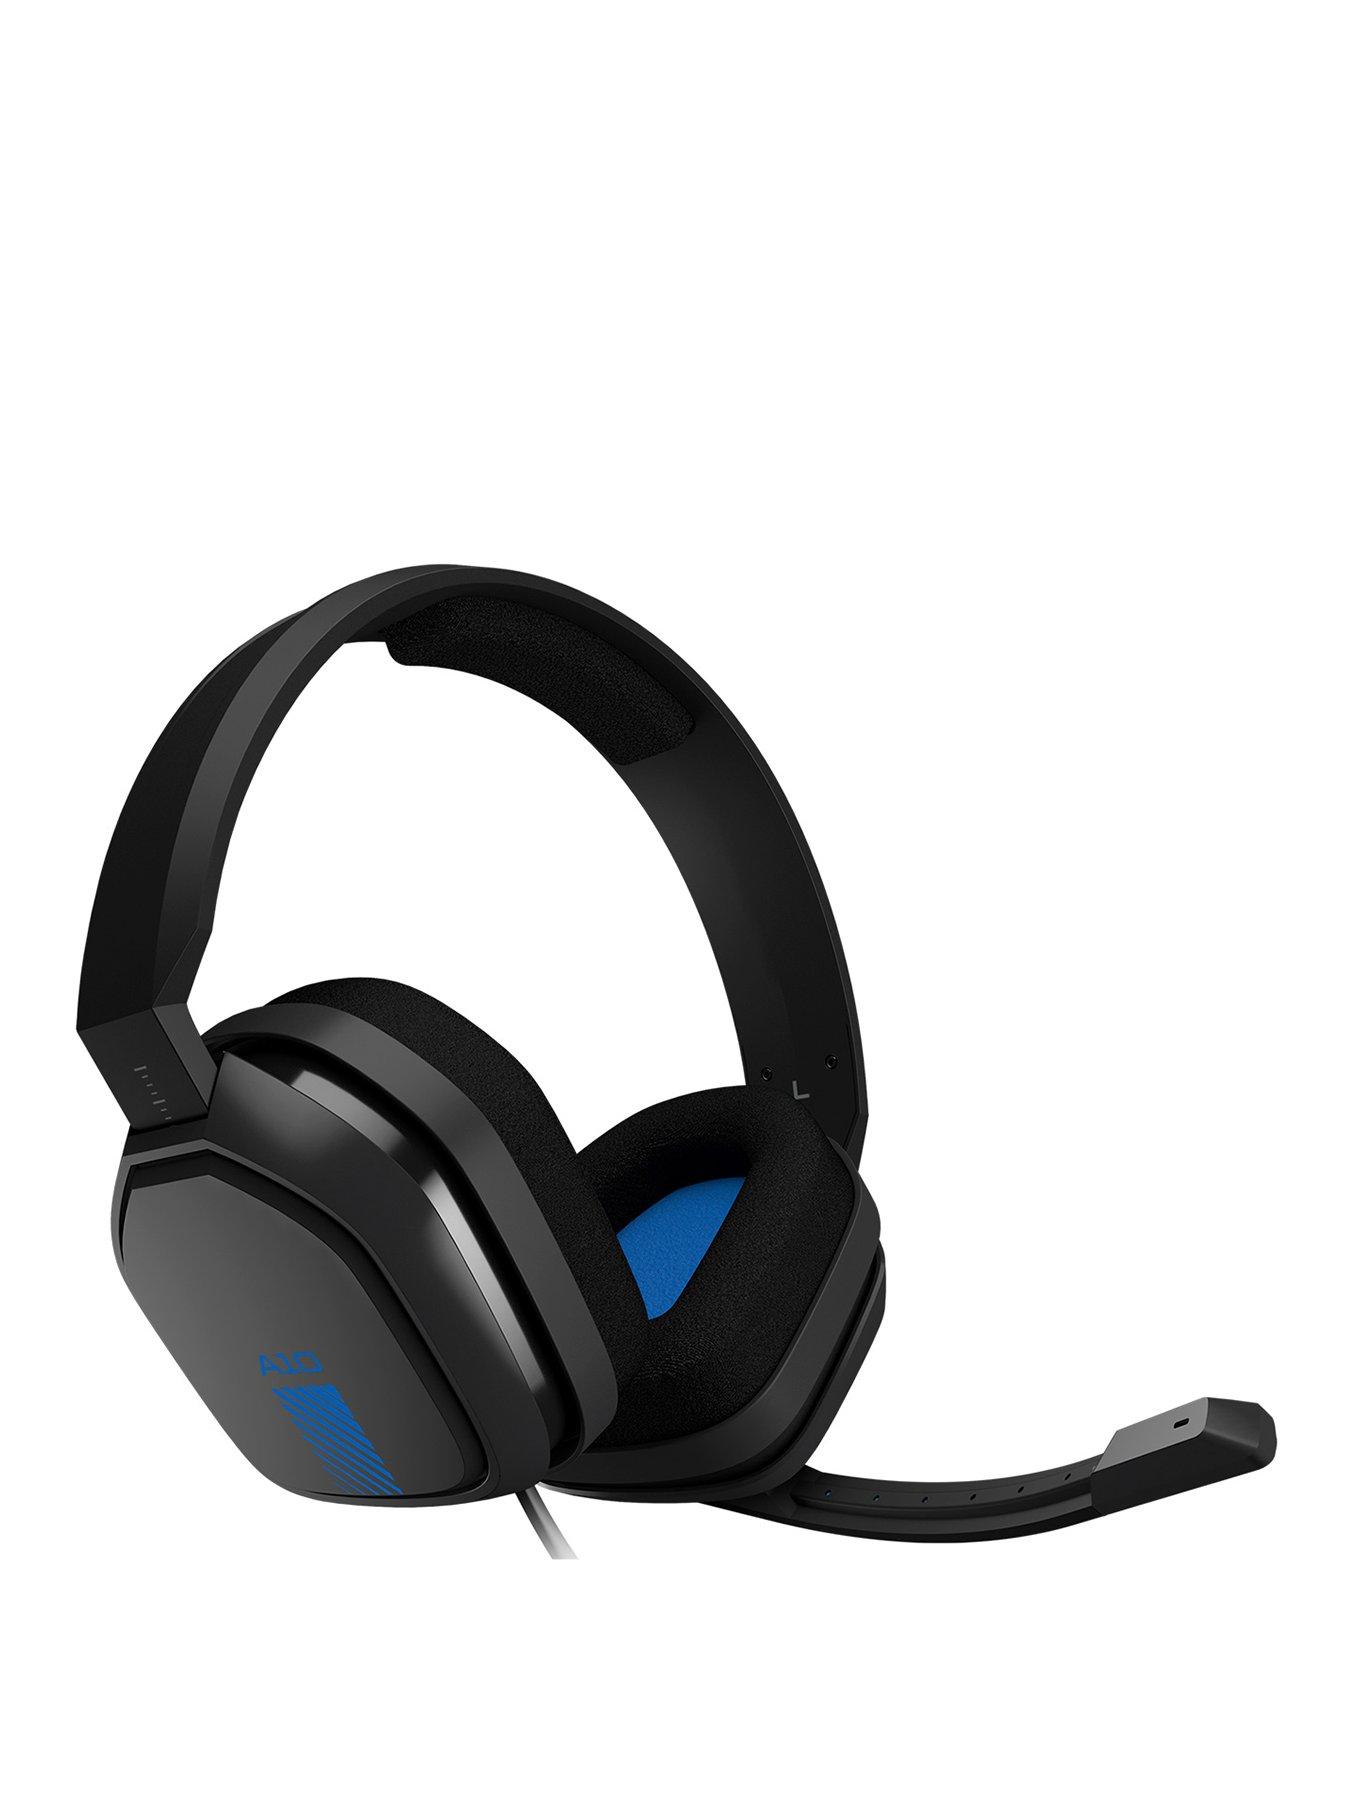 ps4 headset very